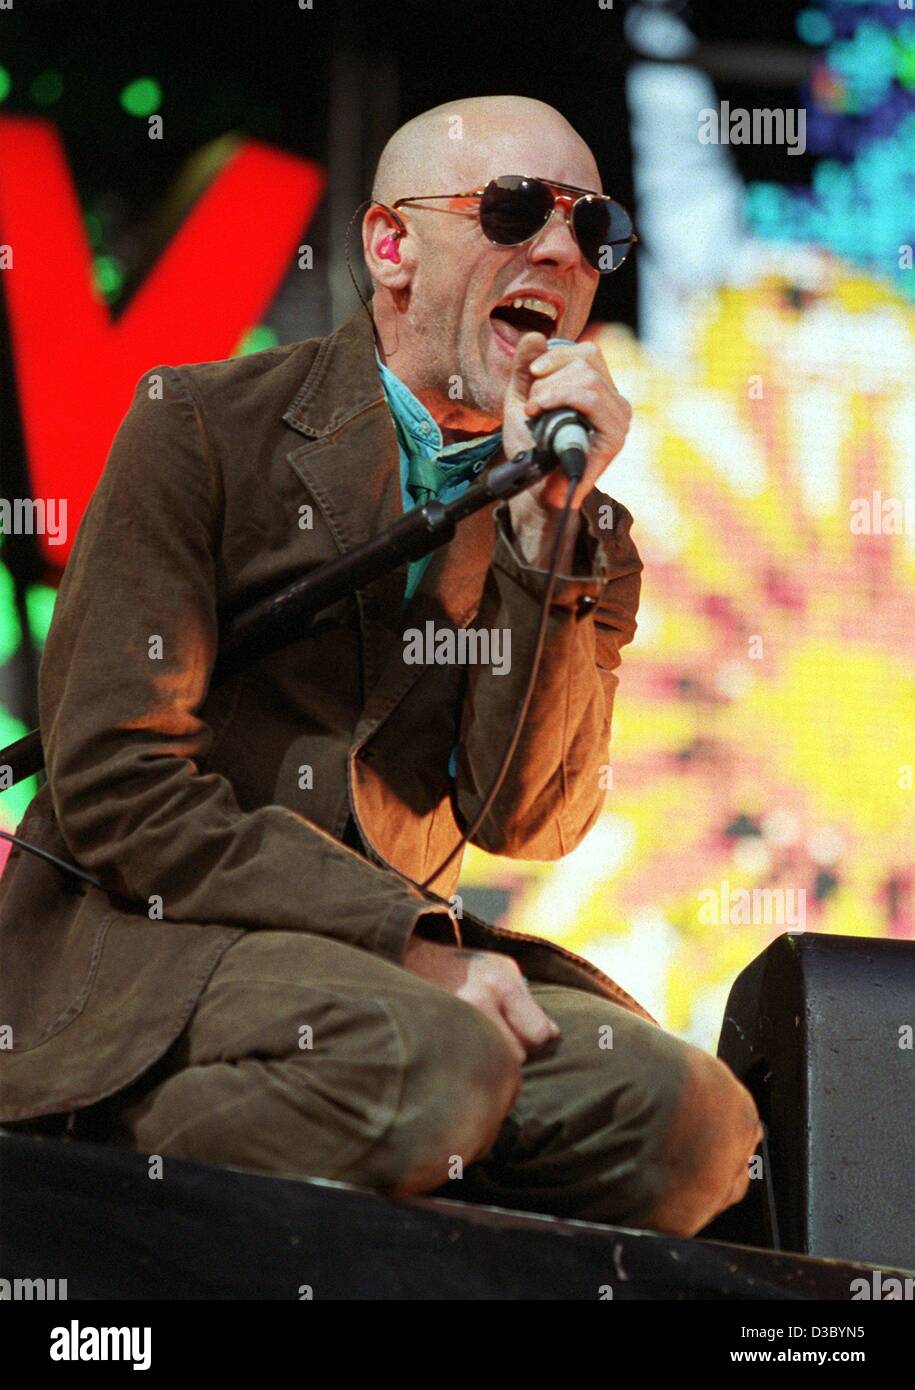 (dpa) - Michael Stipe, frontman of the US band R.E.M., sings during a concert in Wiesbaden, Germany, 19 July 2003. Among other songs, the band performed their hits 'Losing My Religion', 'Daysleeper' and 'It's The End Of The World As We Know It'. Stock Photo